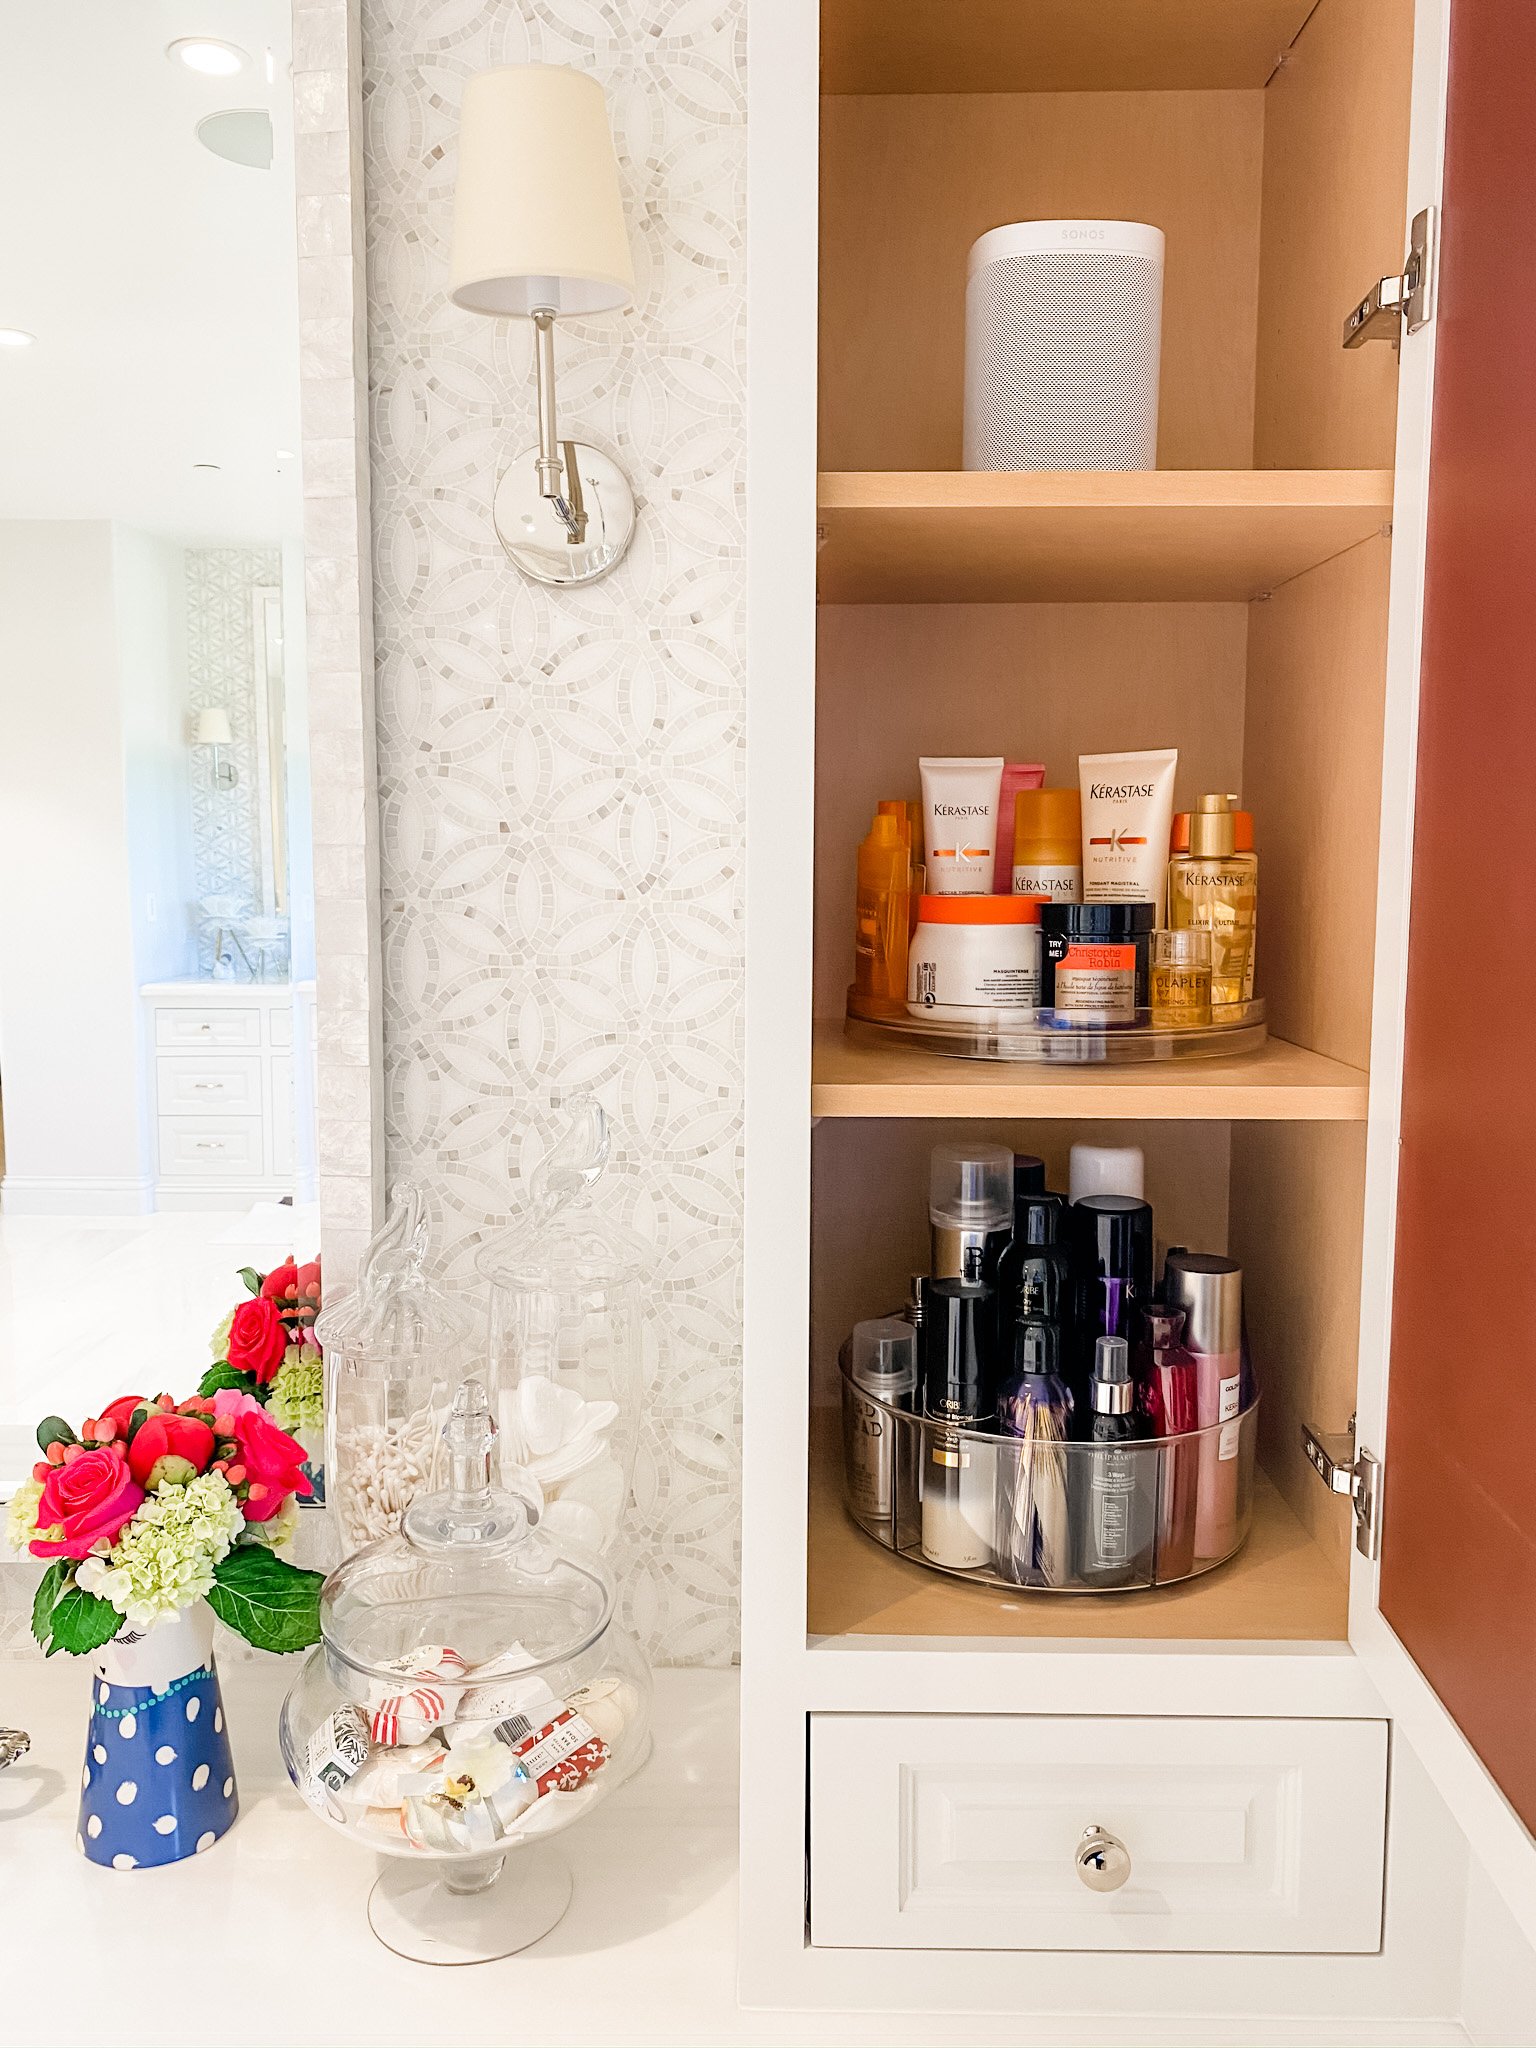 27 Storage Products For Small Bathrooms